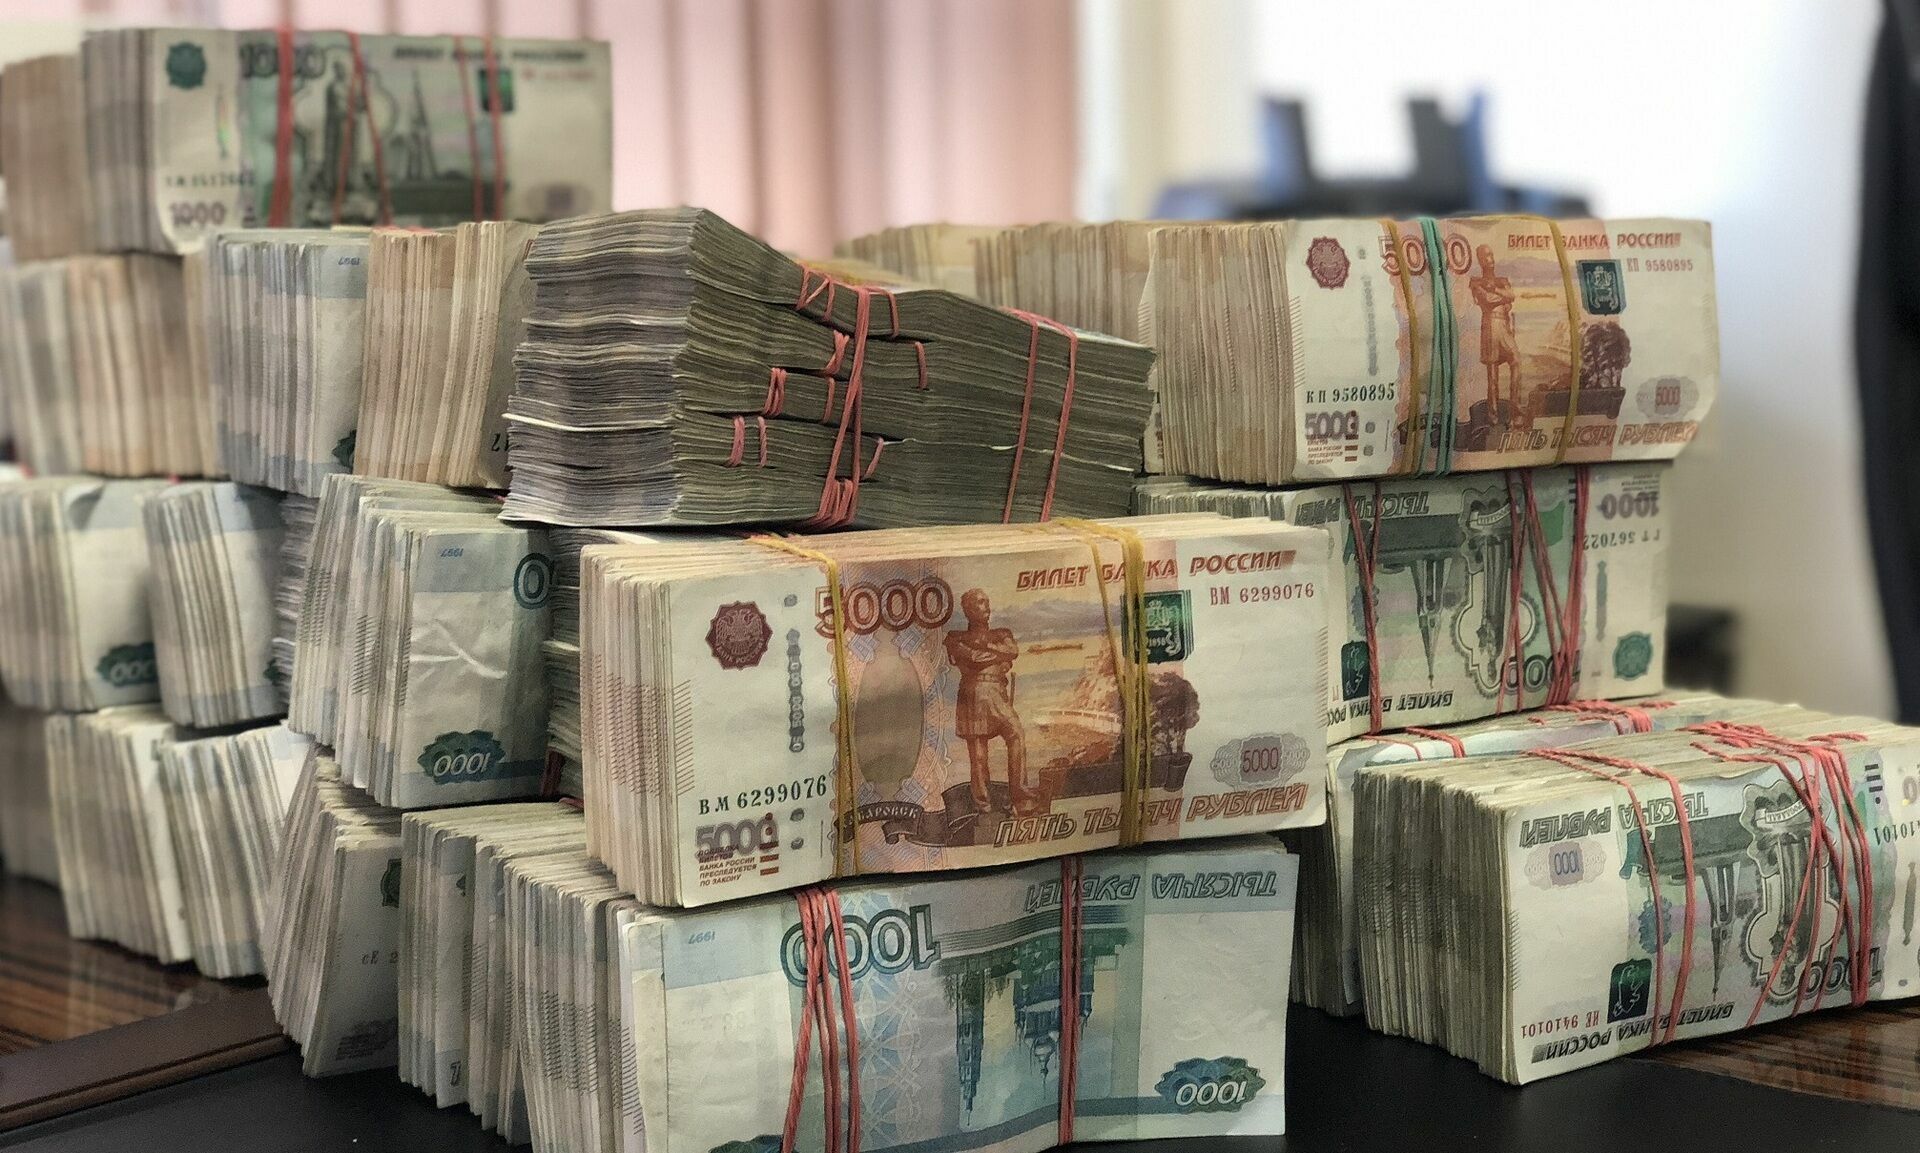 Russians took 200 tons of deposits from banks in cash